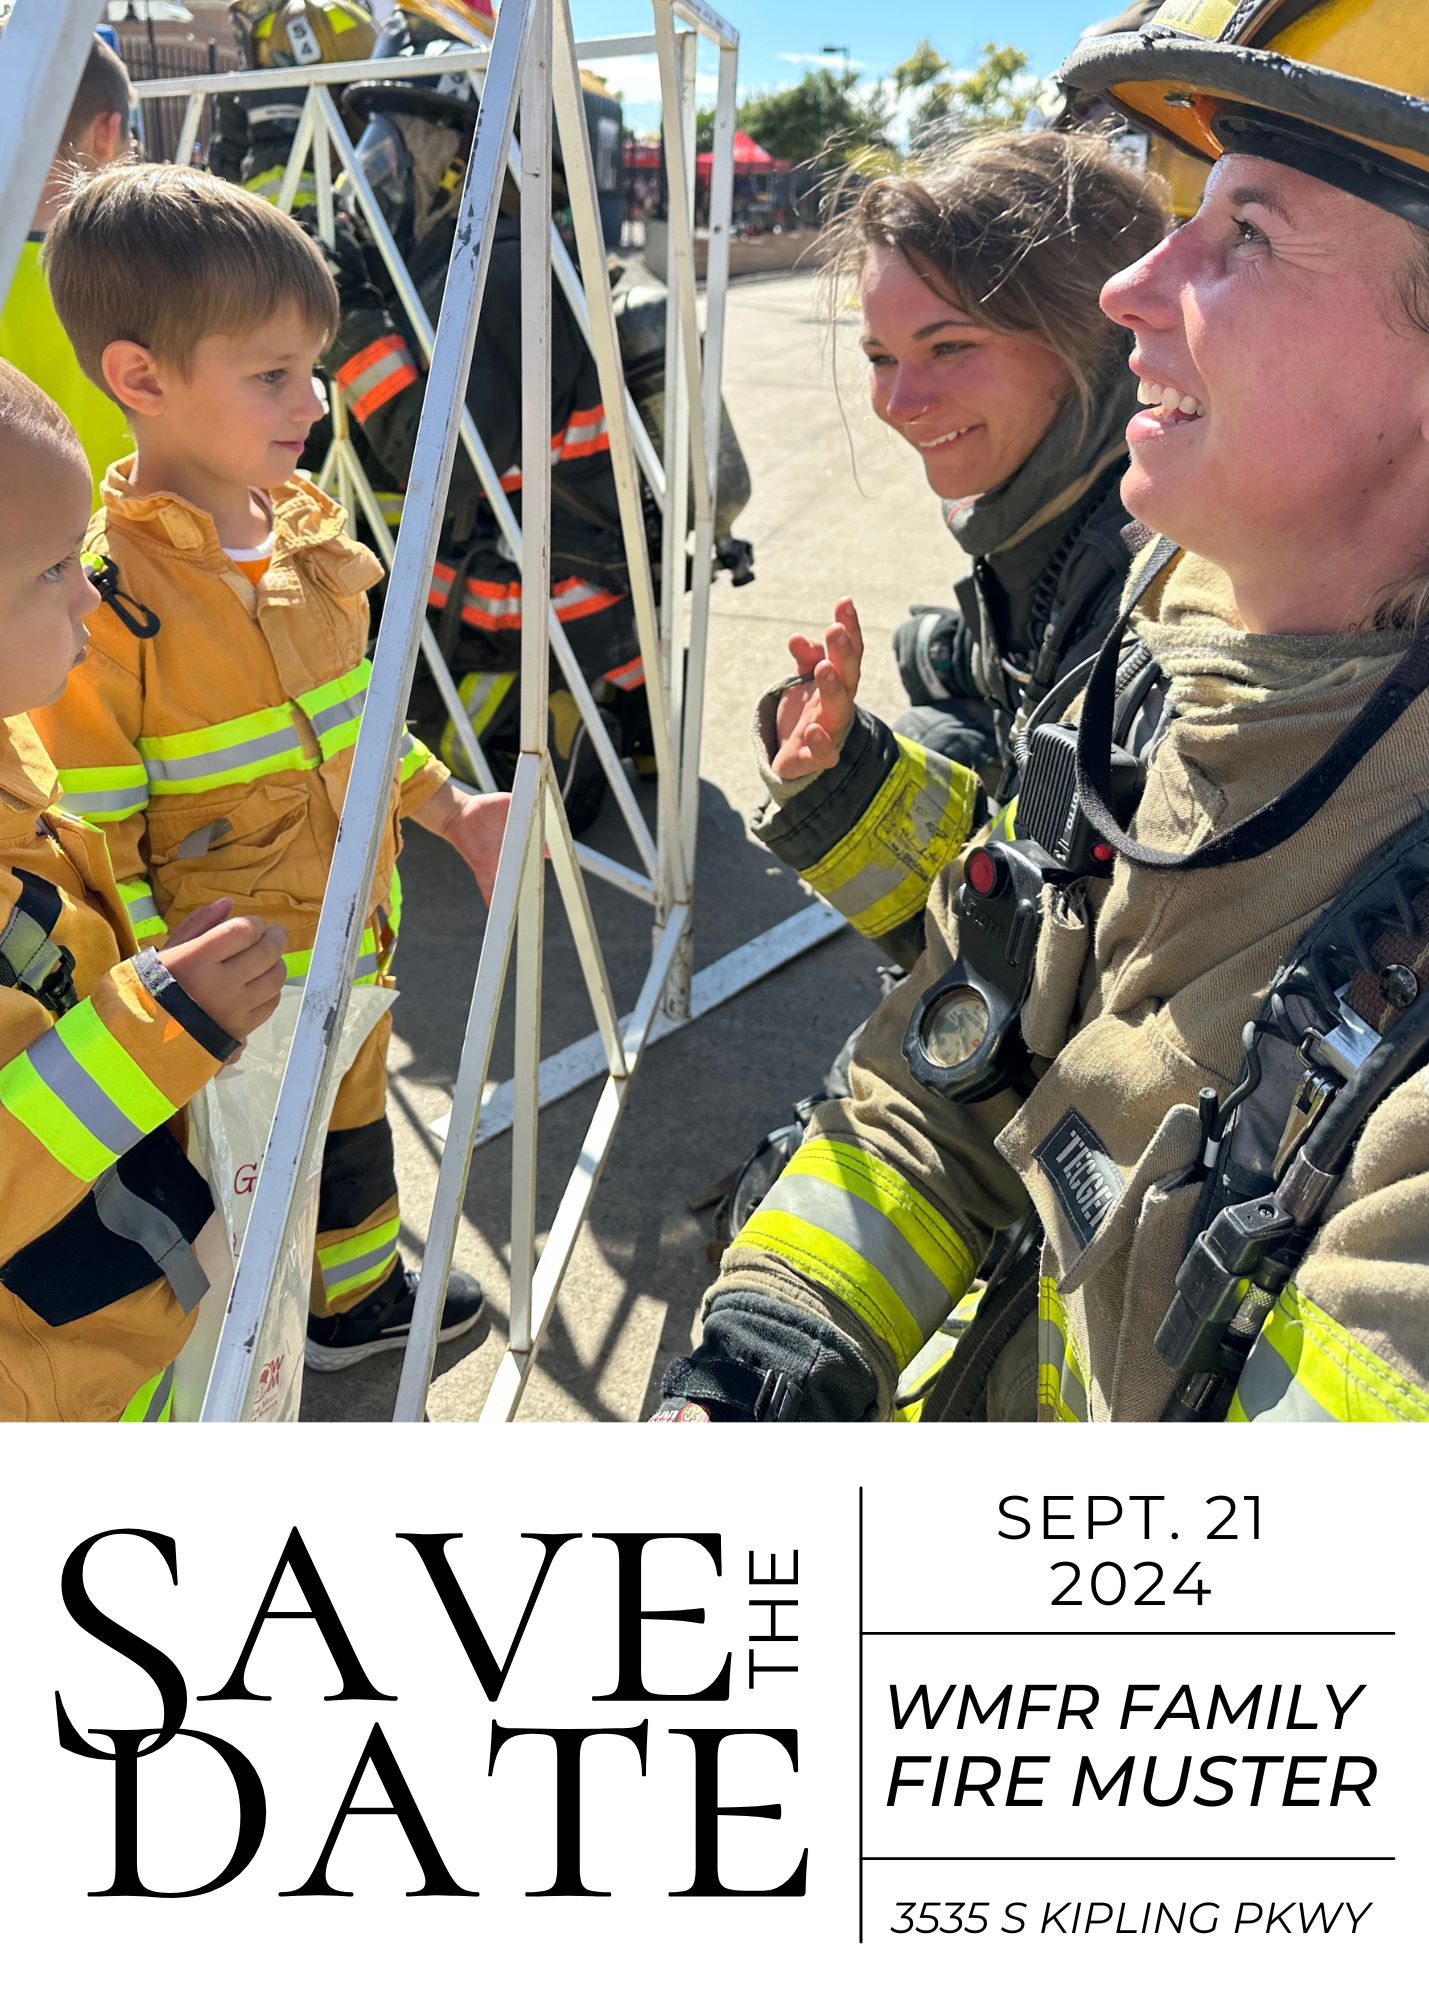 Save the date - September 21st 2024 for the Family Fire Muster